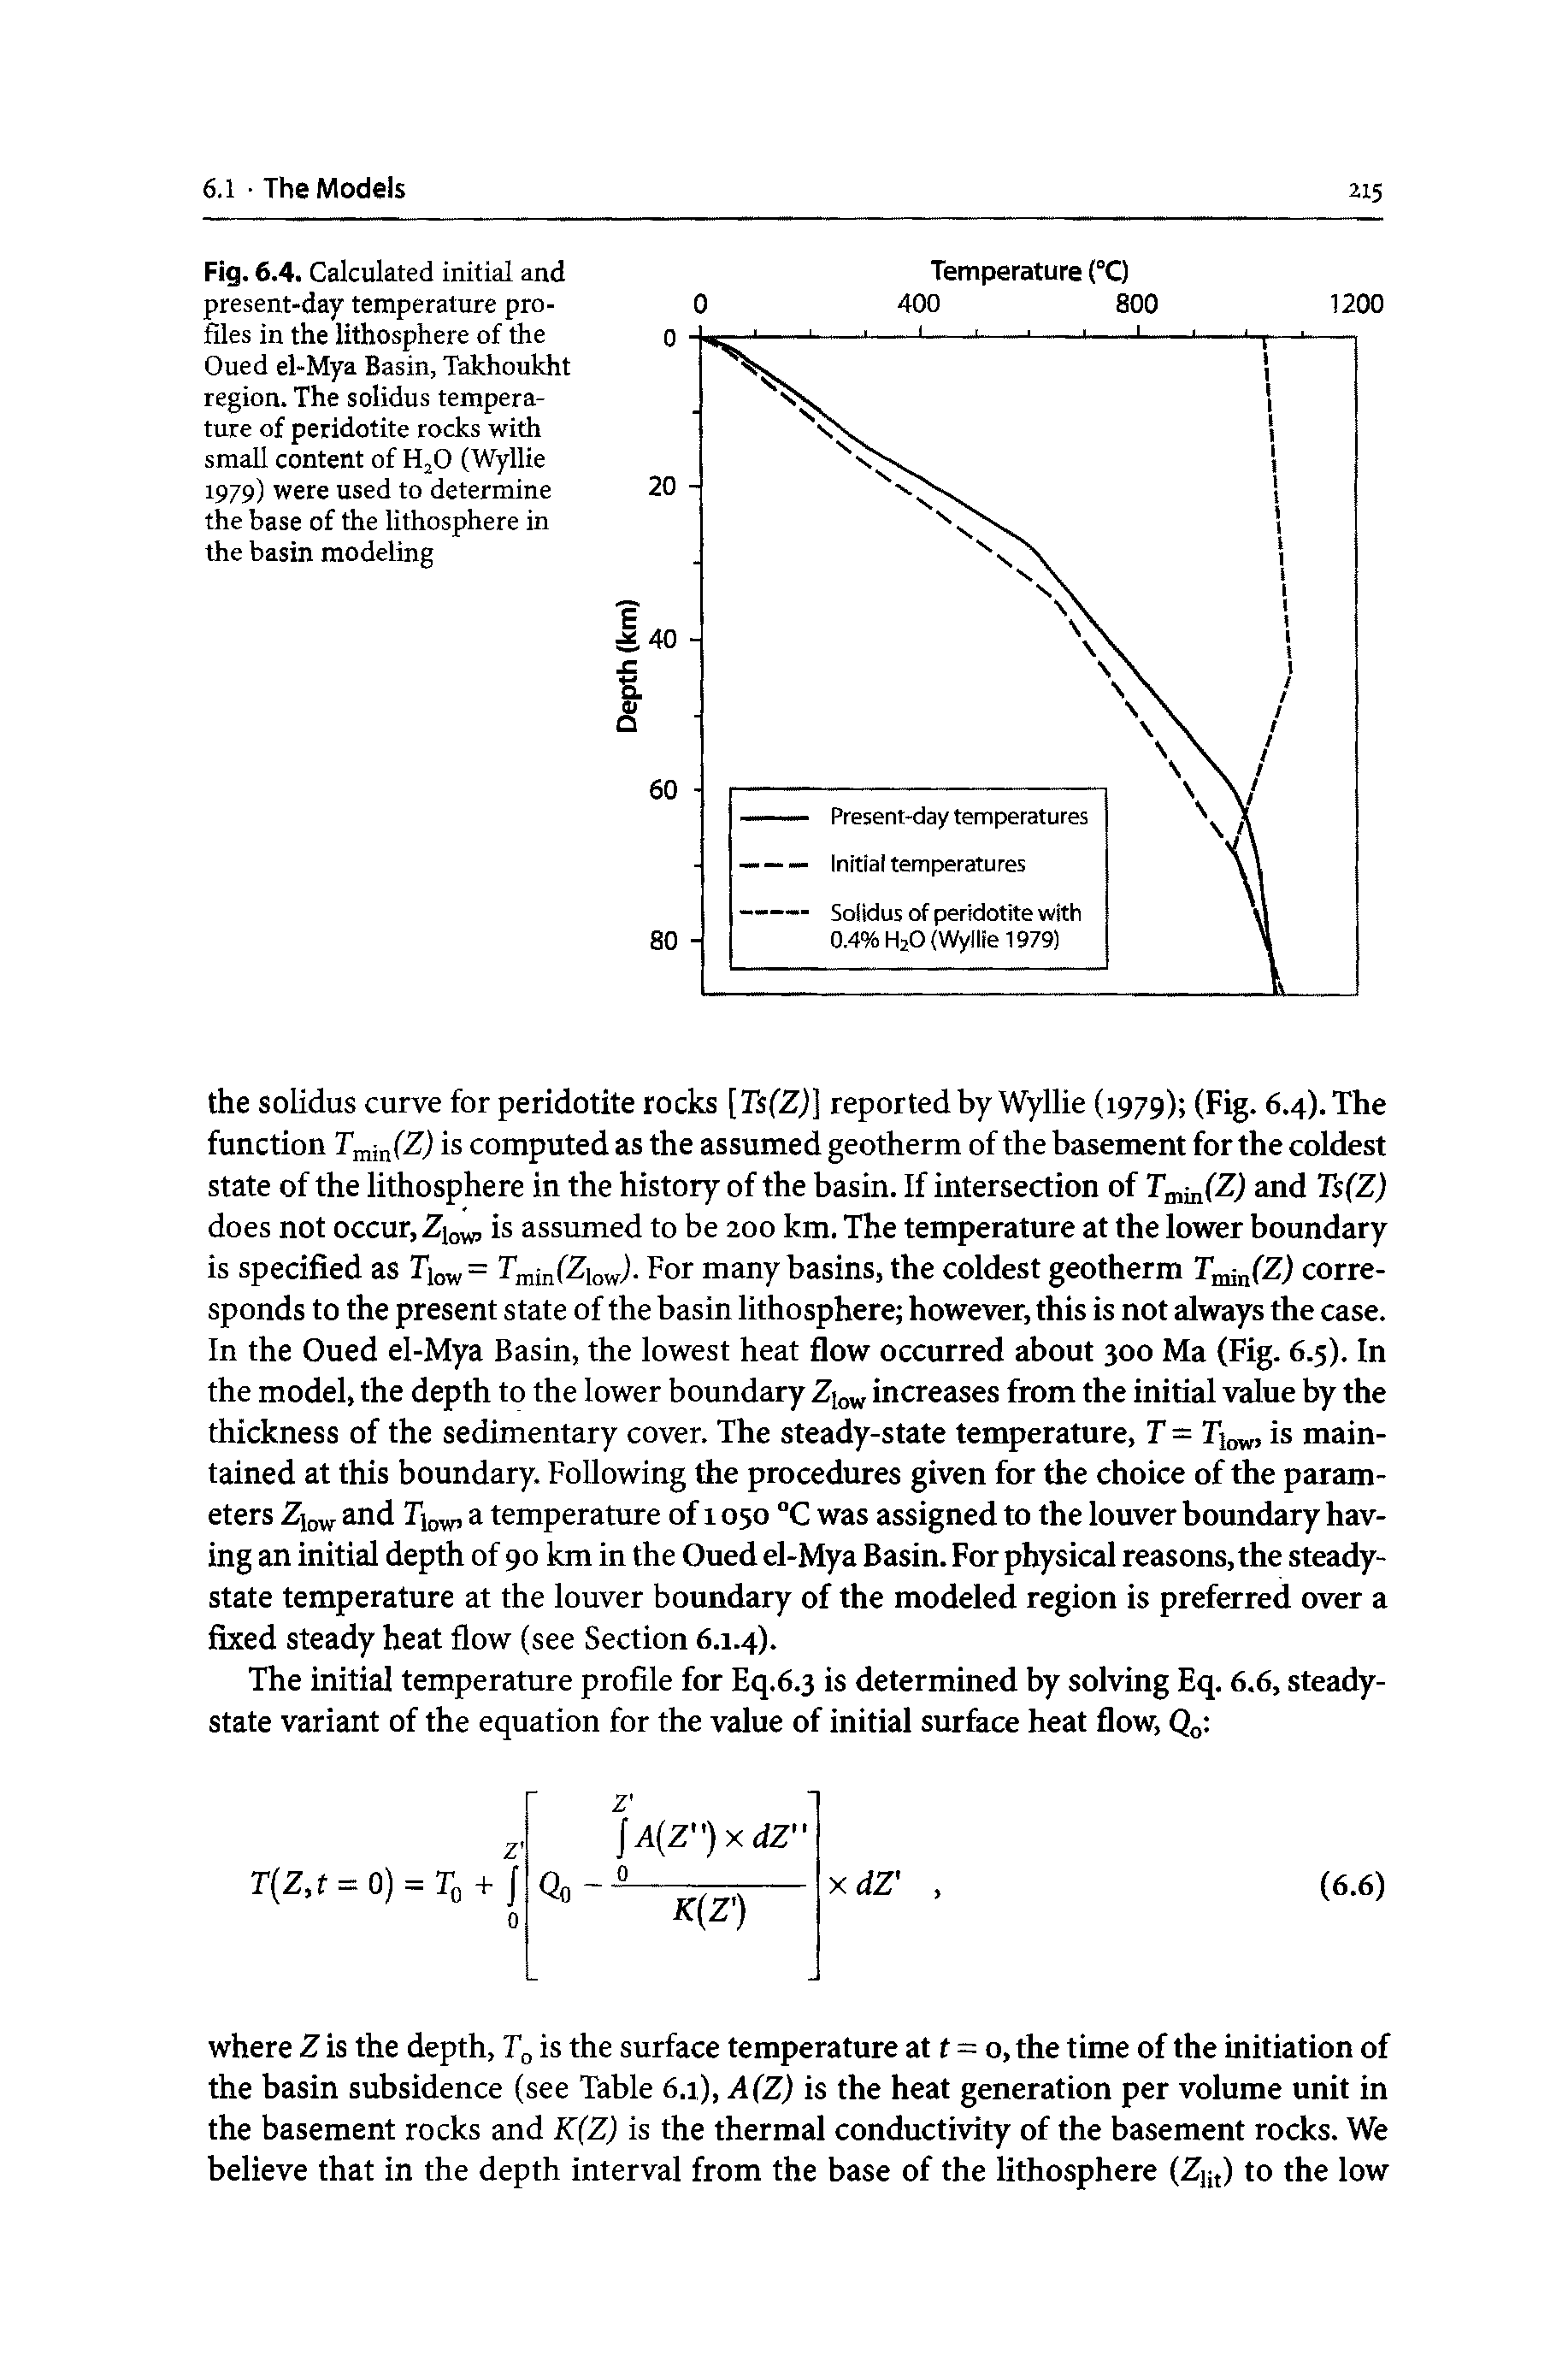 Fig. 6.4. Calculated initial and present-day temperature profiles in the lithosphere of the Oued el-Mya Basin, Takhoukht region. The solidus temperature of peridotite rocks with small content of HjO (Wyllie 1979) were used to determine the base of the lithosphere in the basin modeling...